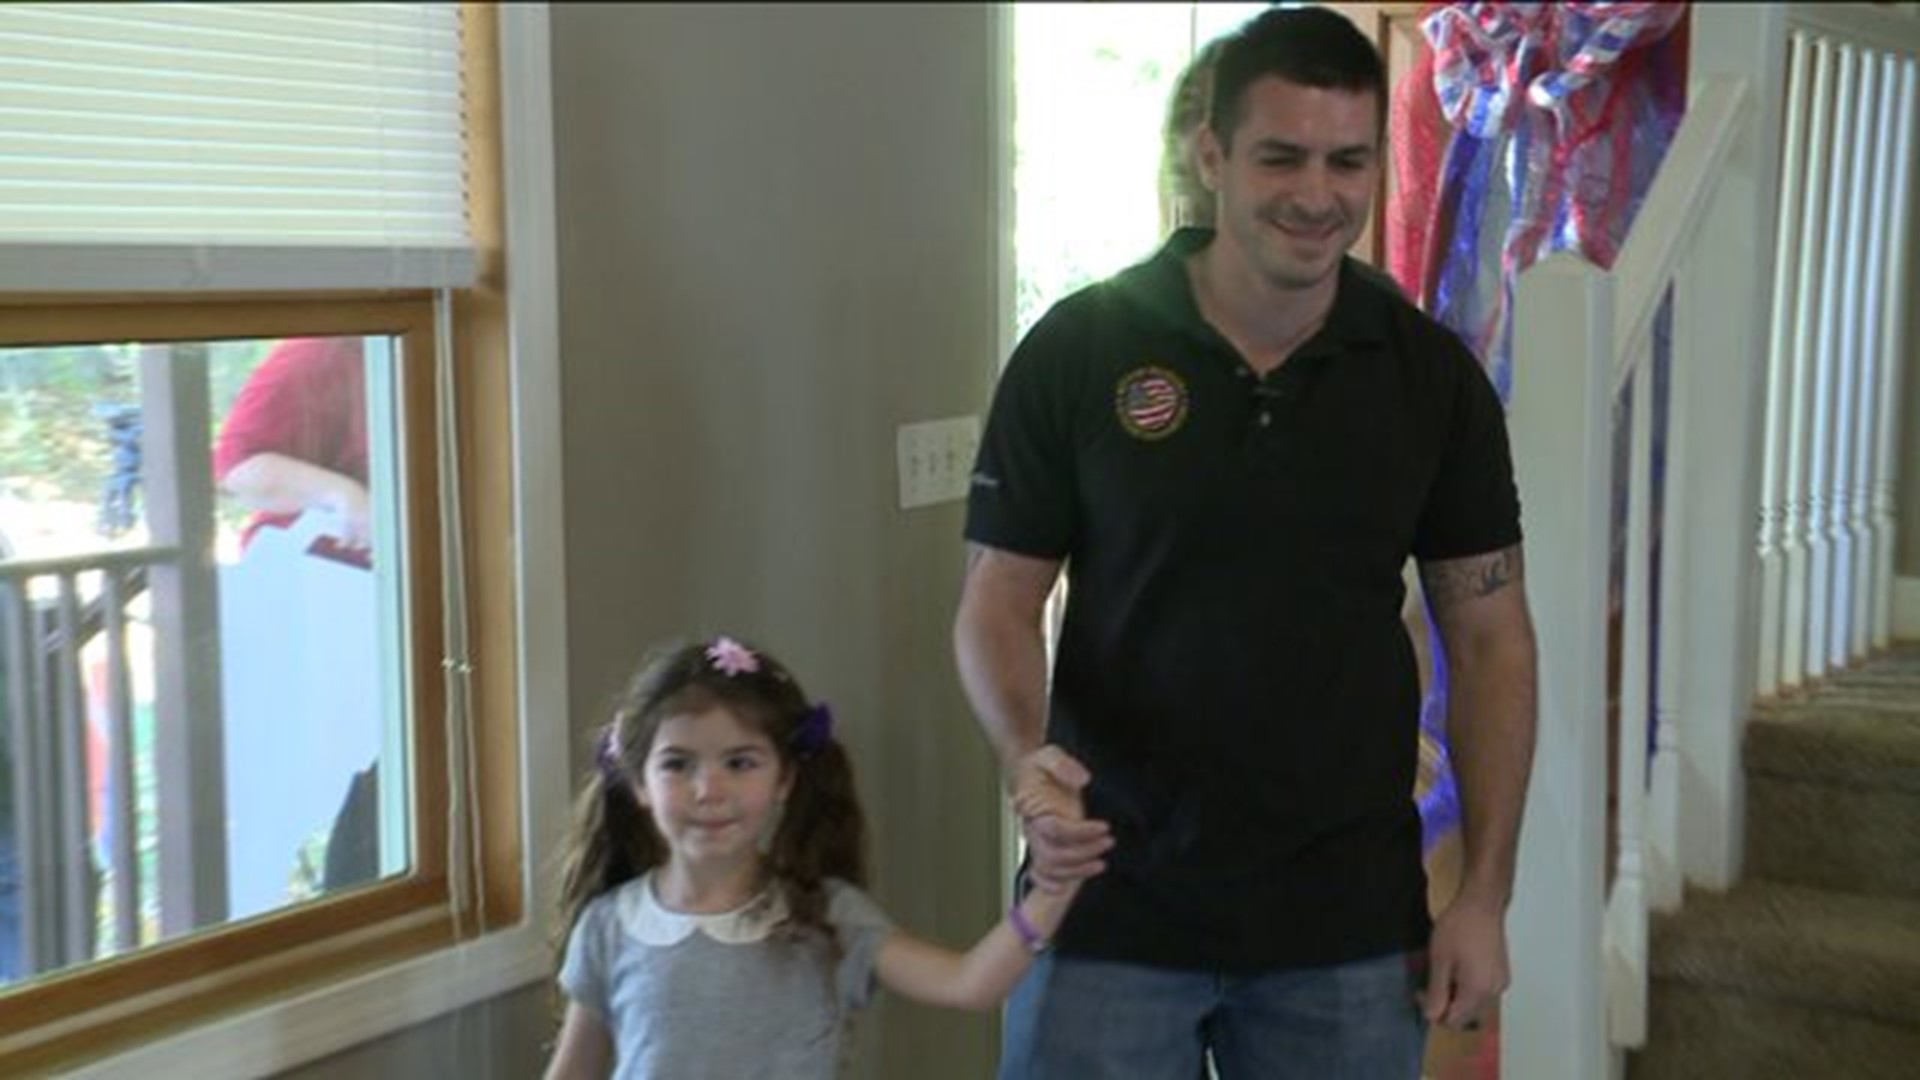 Military dad welcomed home with new house